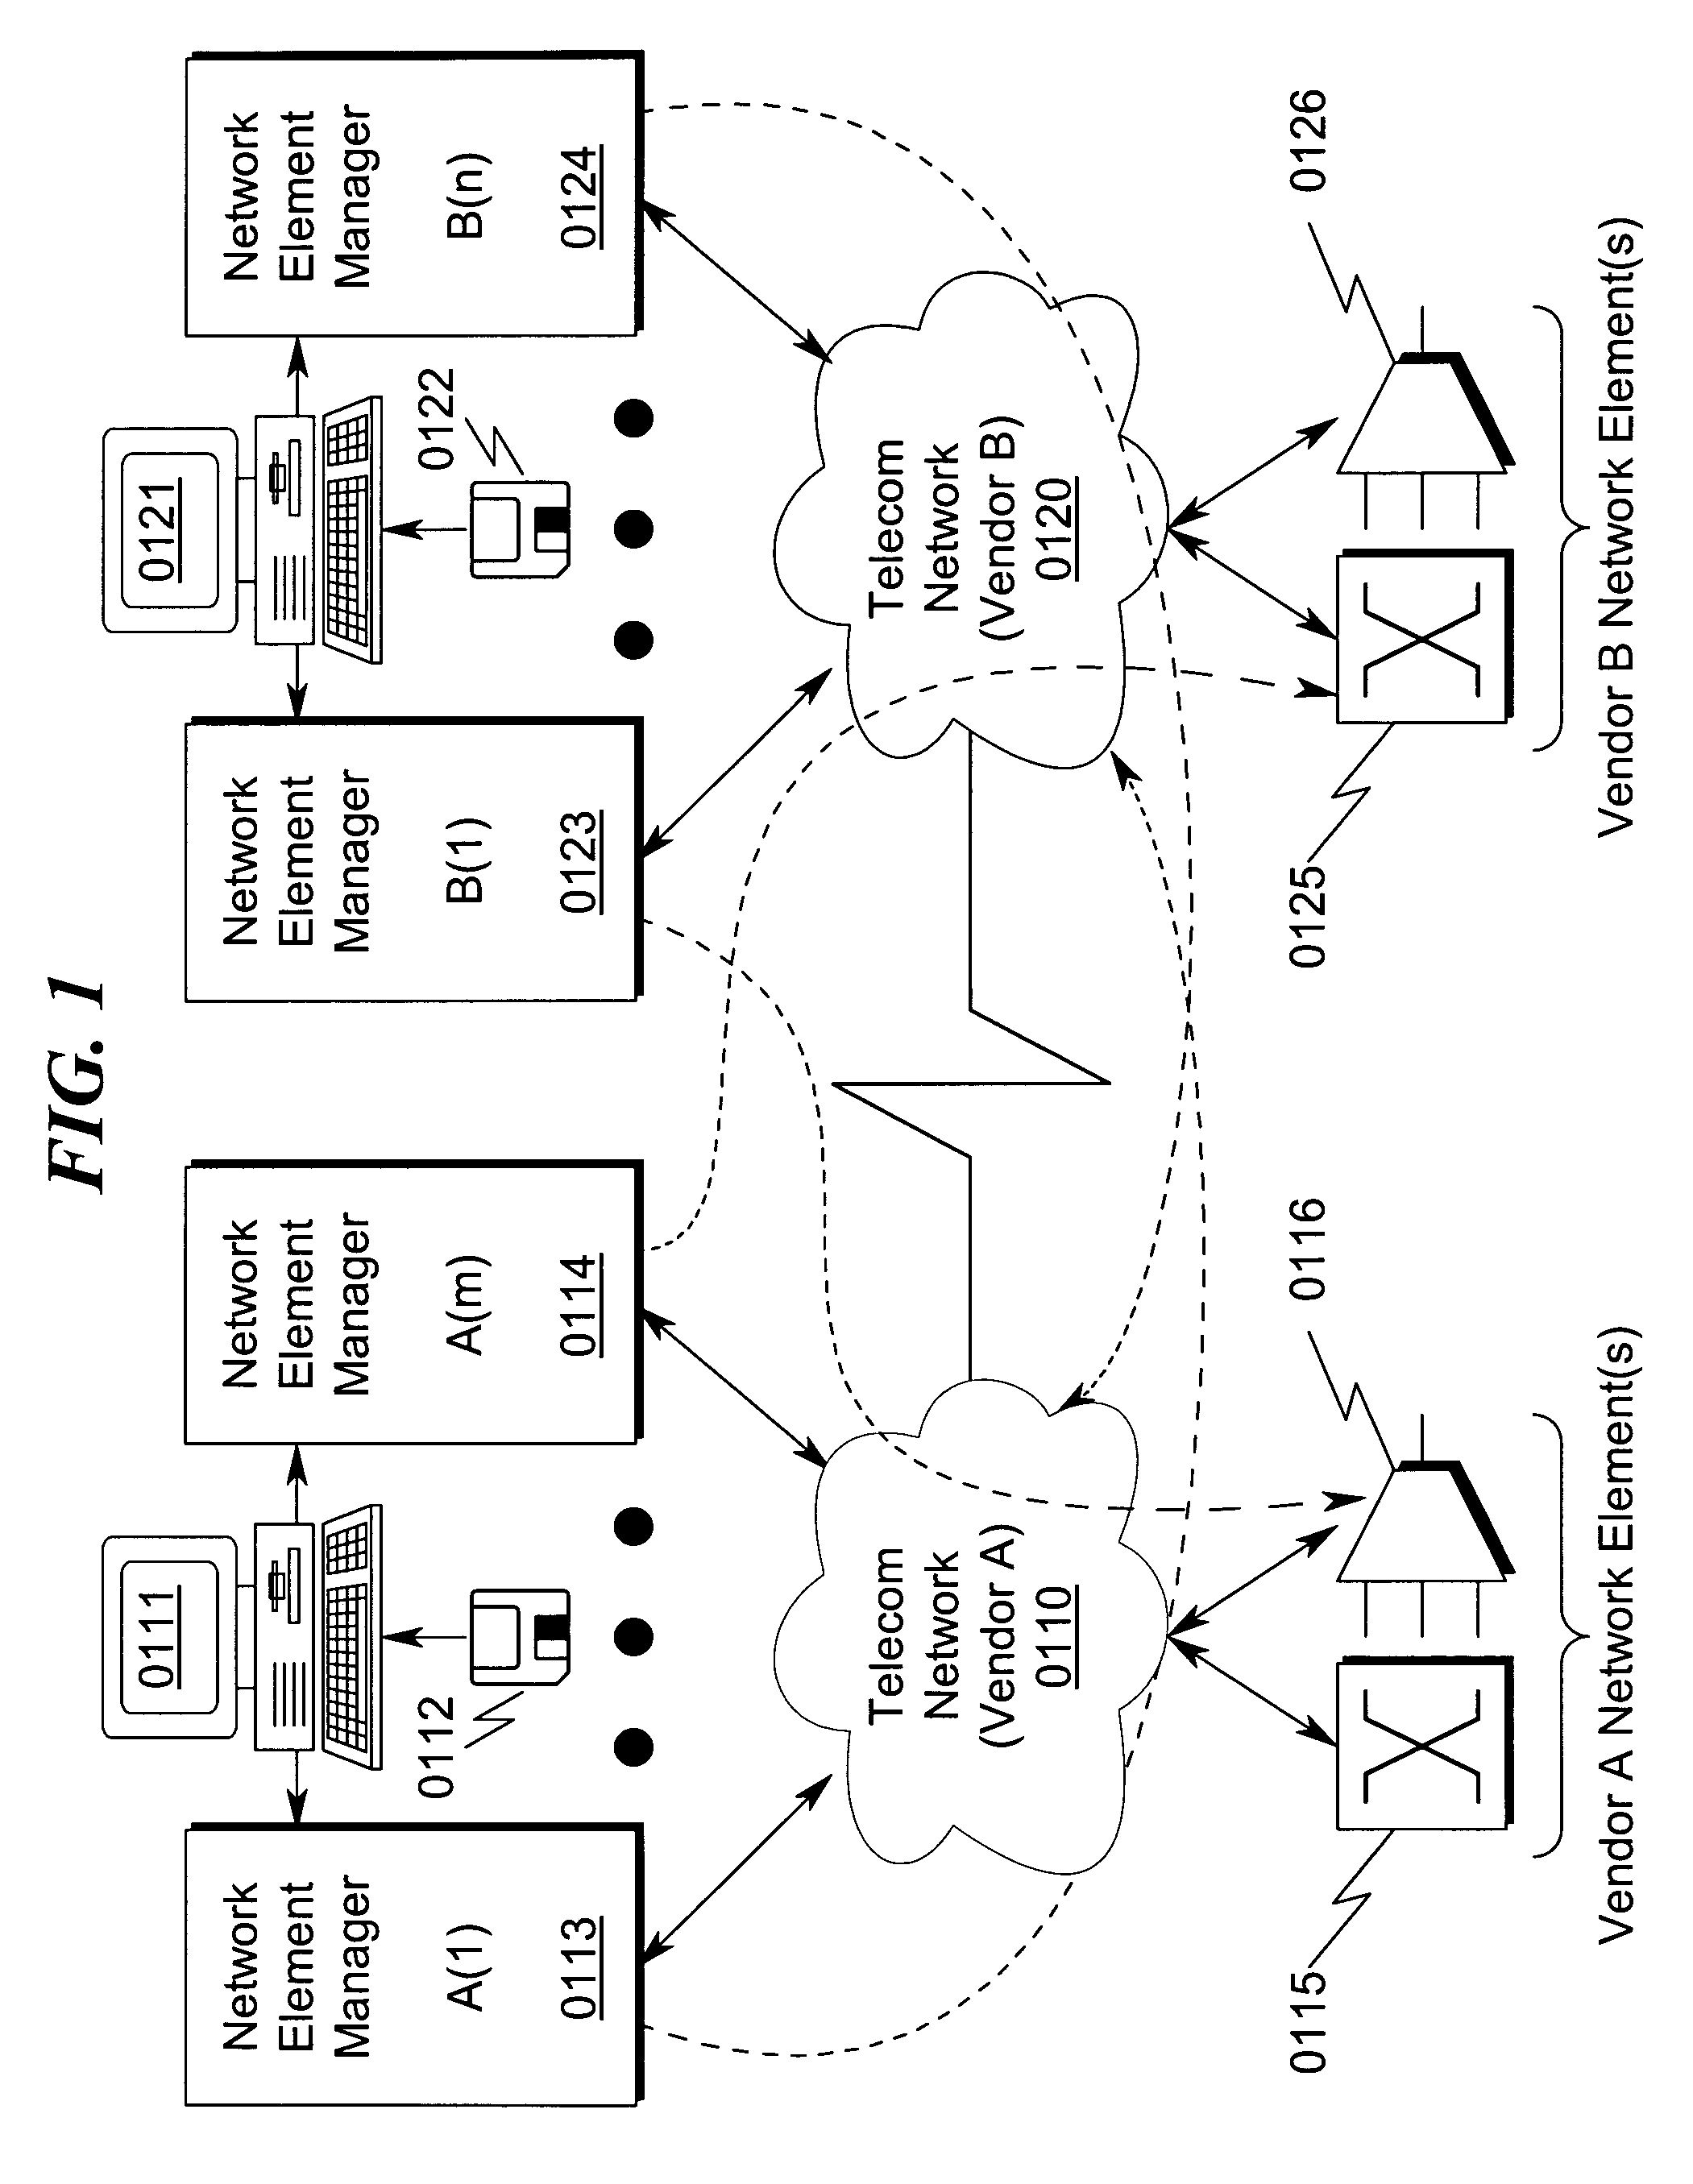 Element manager common gateway architecture system and method